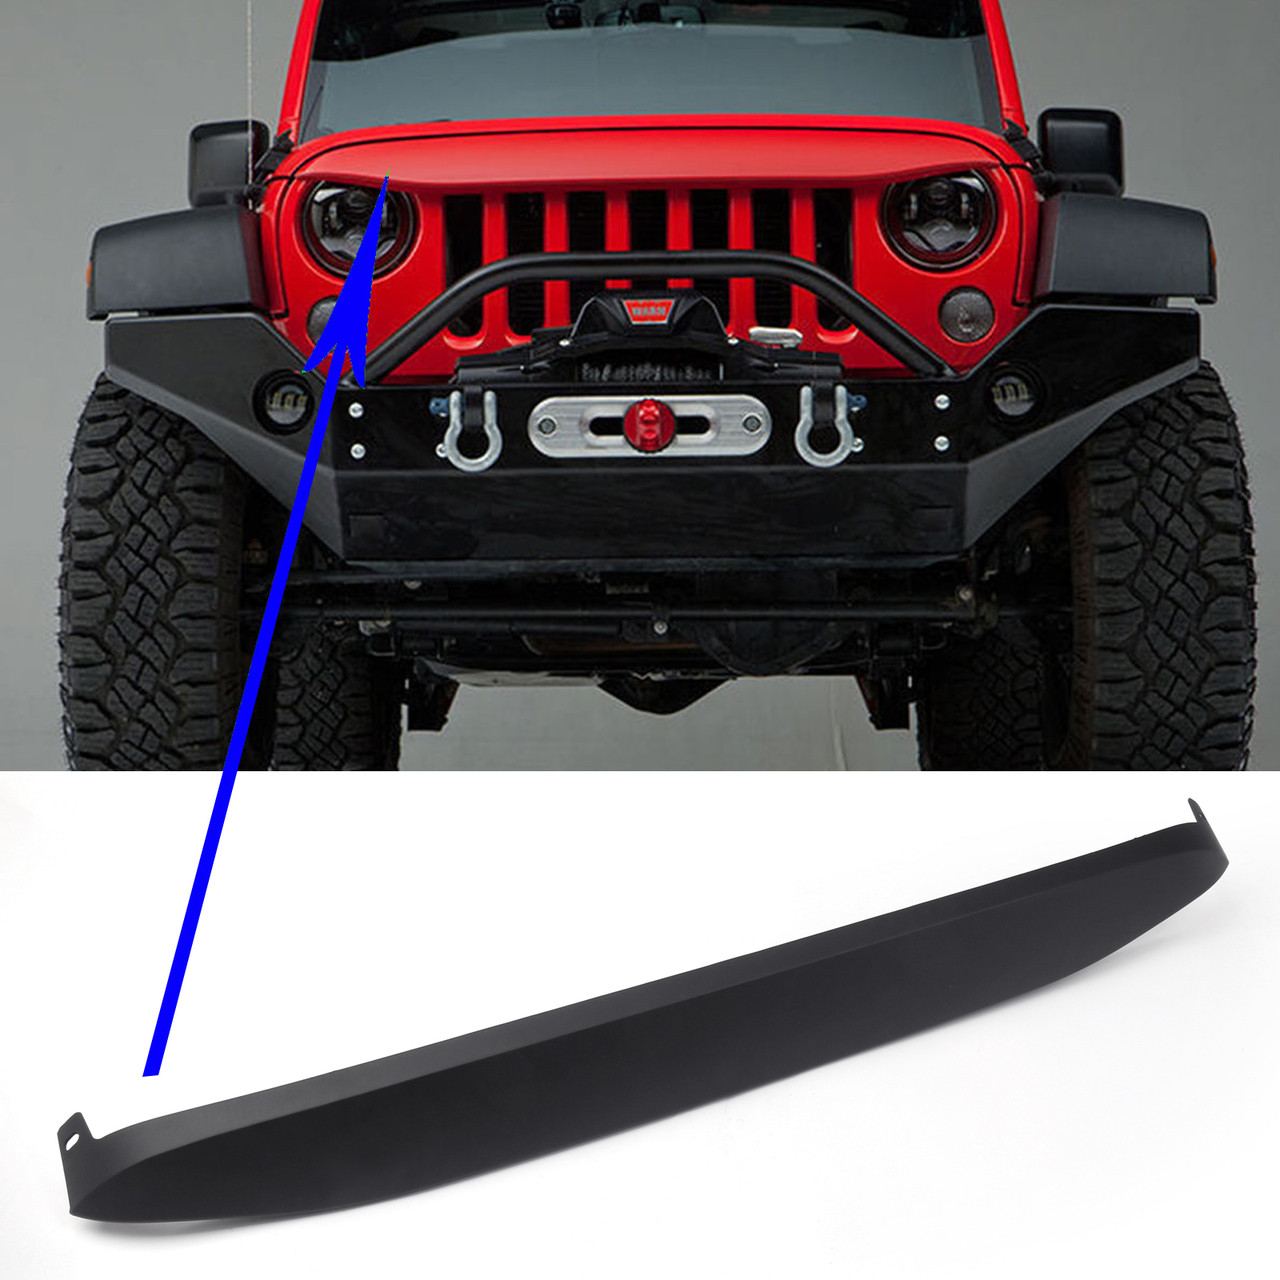 Nighthawk Light Brow Angry Front Grille Look For Jeep Wrangler JK 07-17 Black